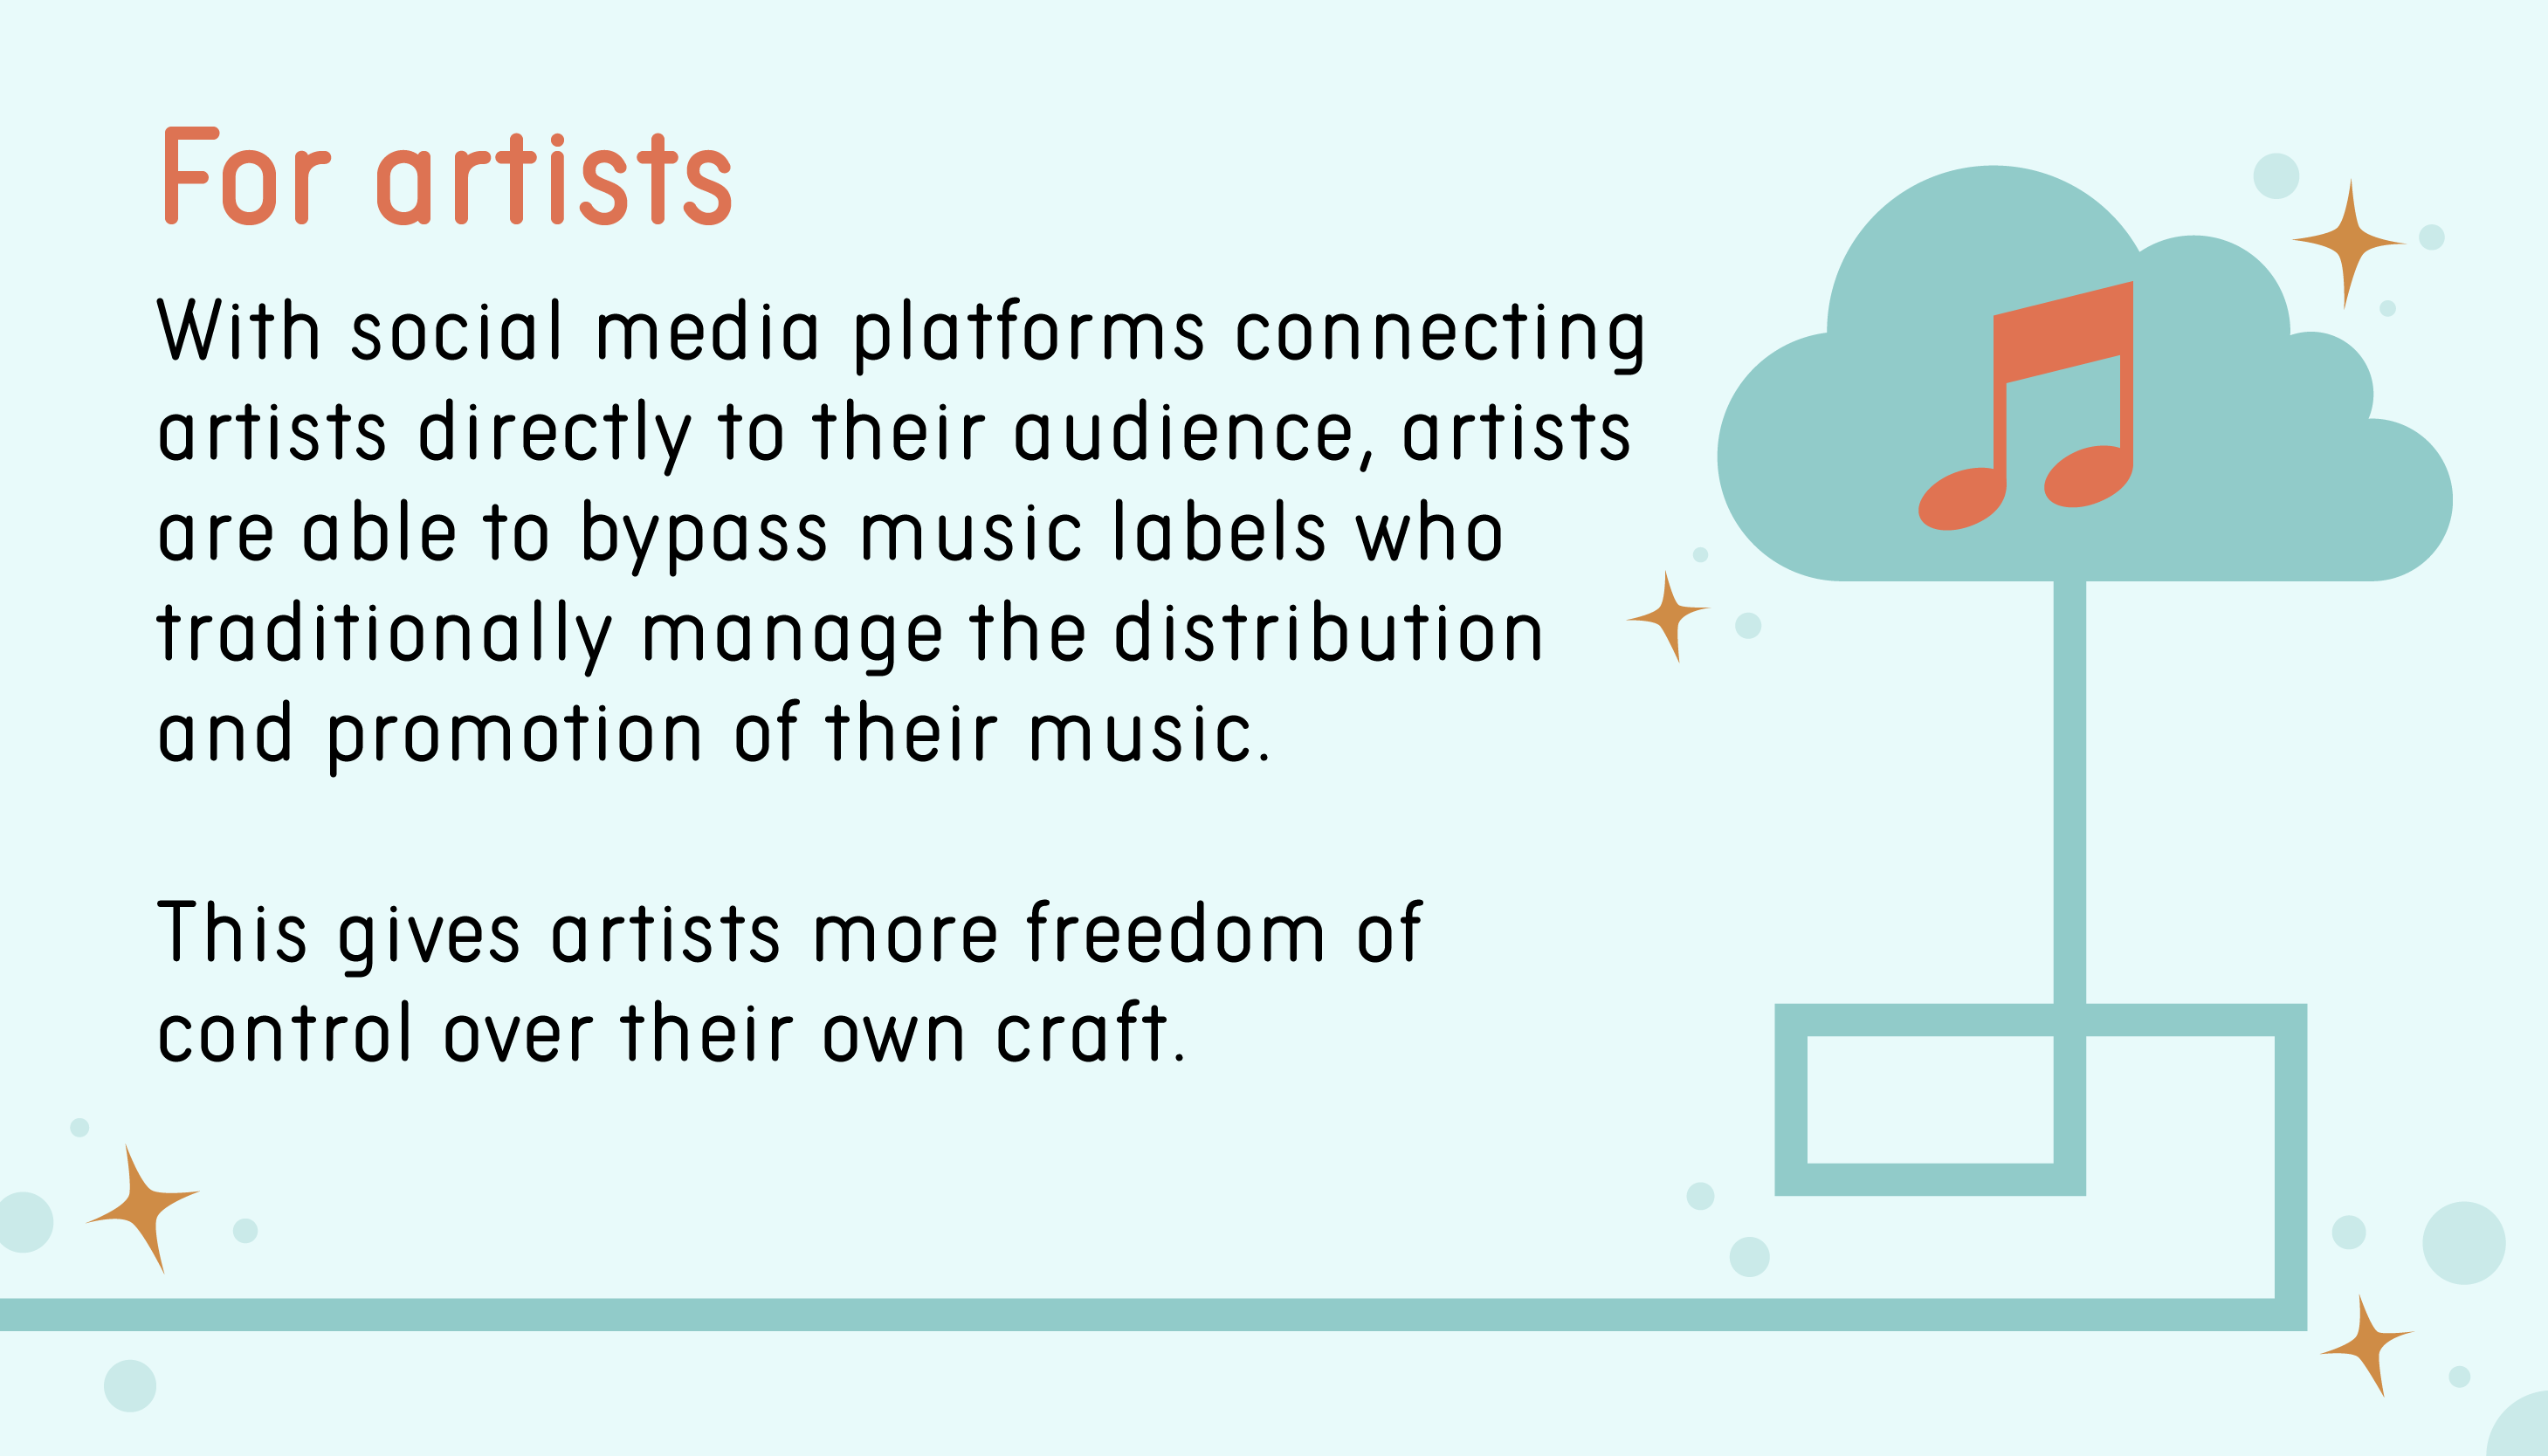 For artists: With social media platforms connecting artists directly to their audience, artists are able to bypass music labels who traditionally manage the distribution and promotion of their music. This gives artists more freedom of control over their own craft.